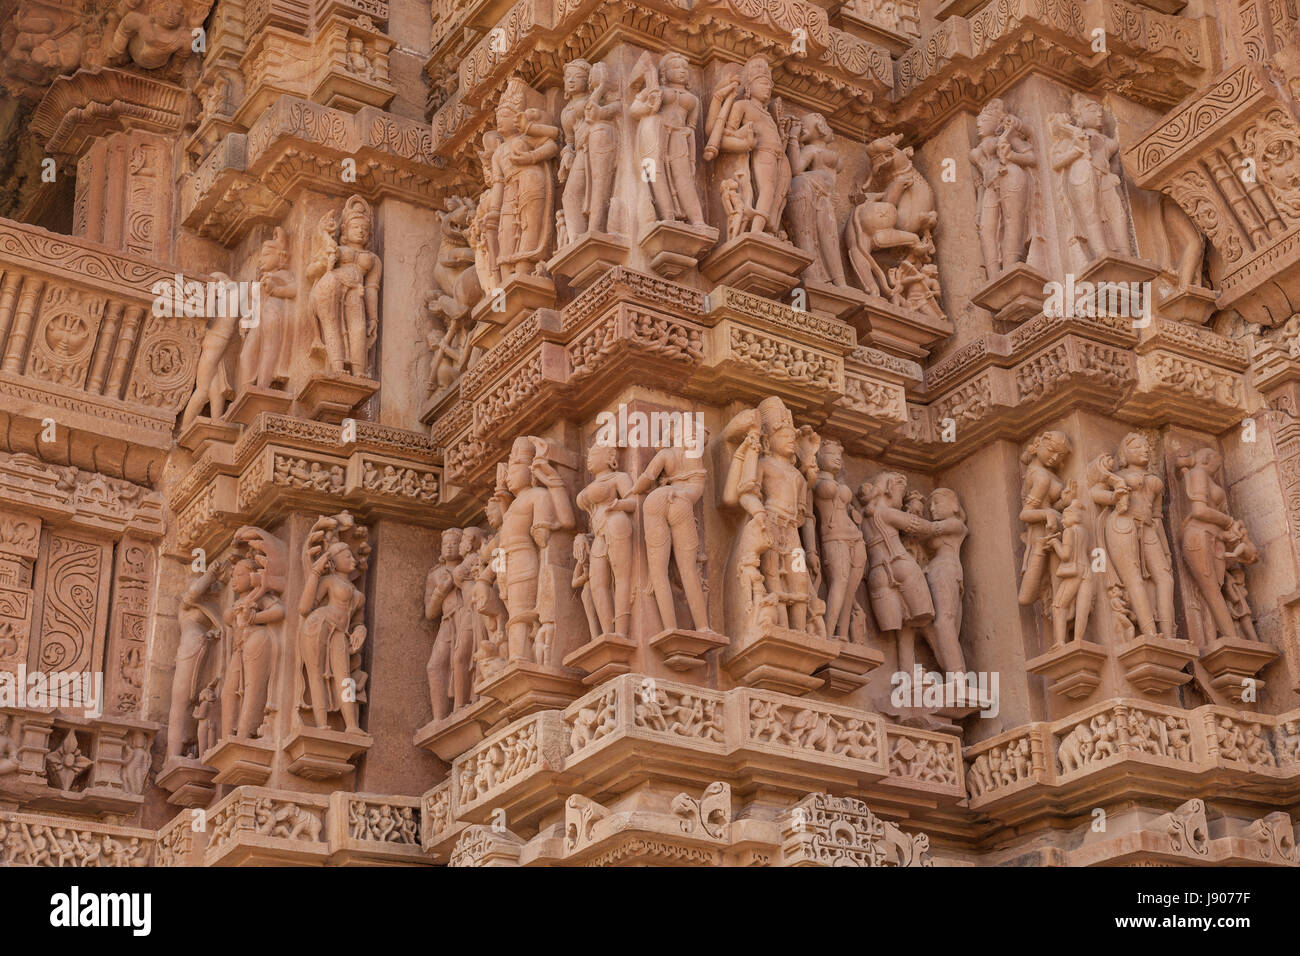 Stone carvings on Temple at Khajuraho,Orchha,Temple in India,Asia, unique Ind0-Aryan architecture,Chhatarpur of Madhya Pradesh Stock Photo